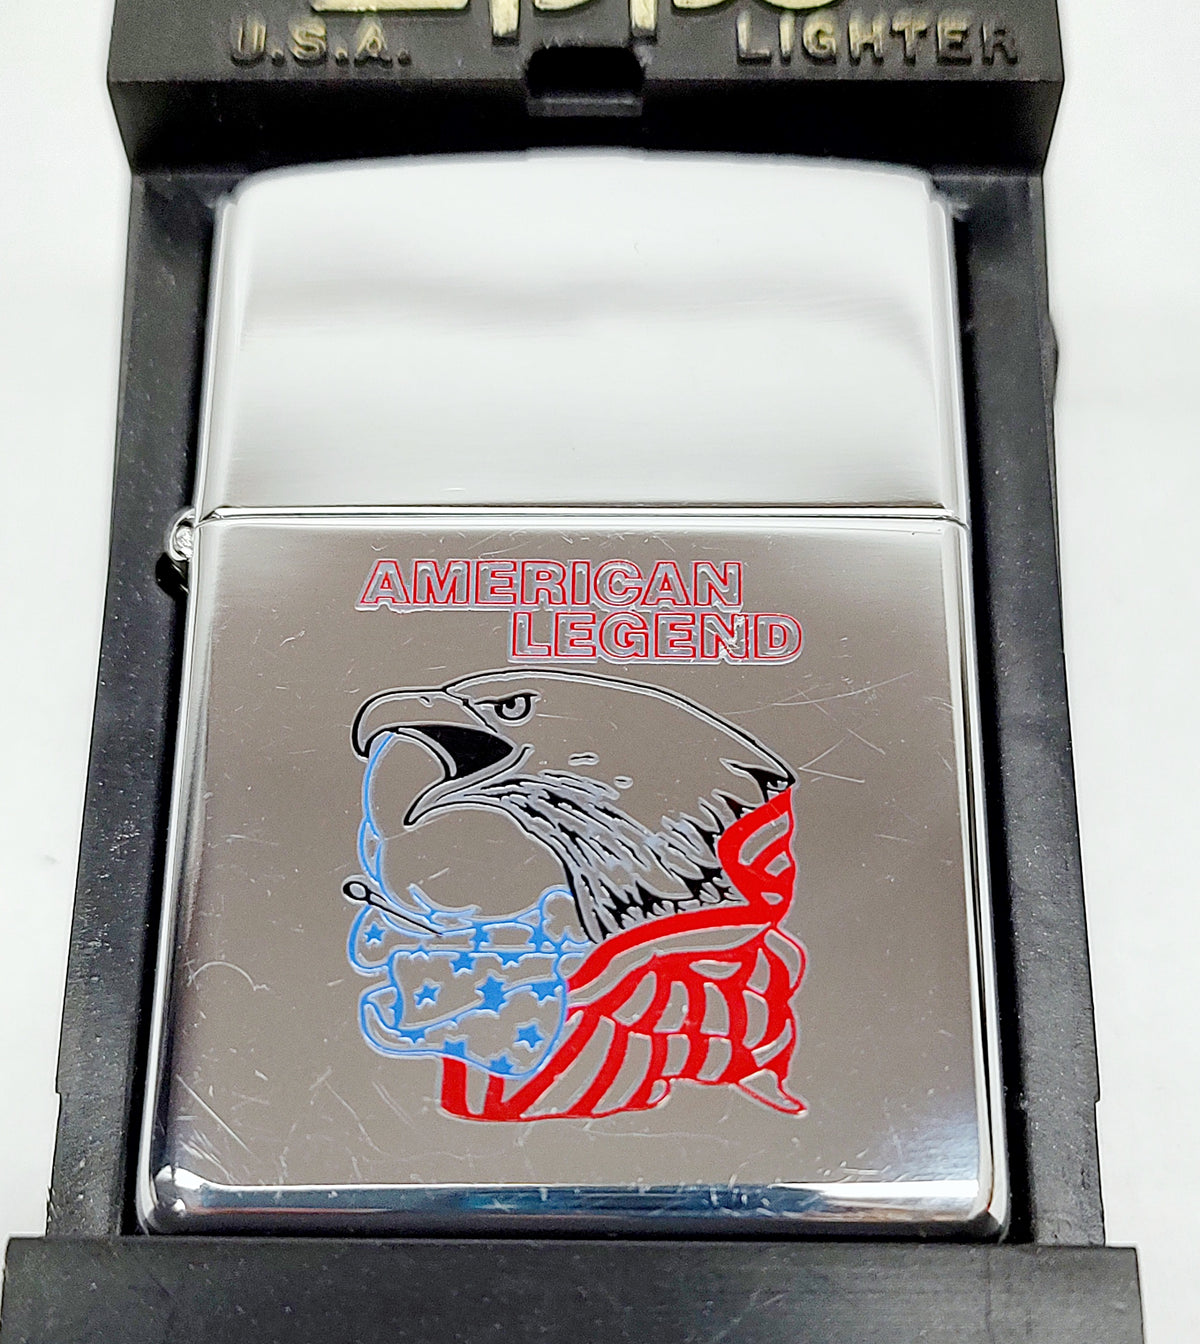 New 2001 American Legend Eagle High Polished Chrome Zippo Lighter - Hers and His Treasures